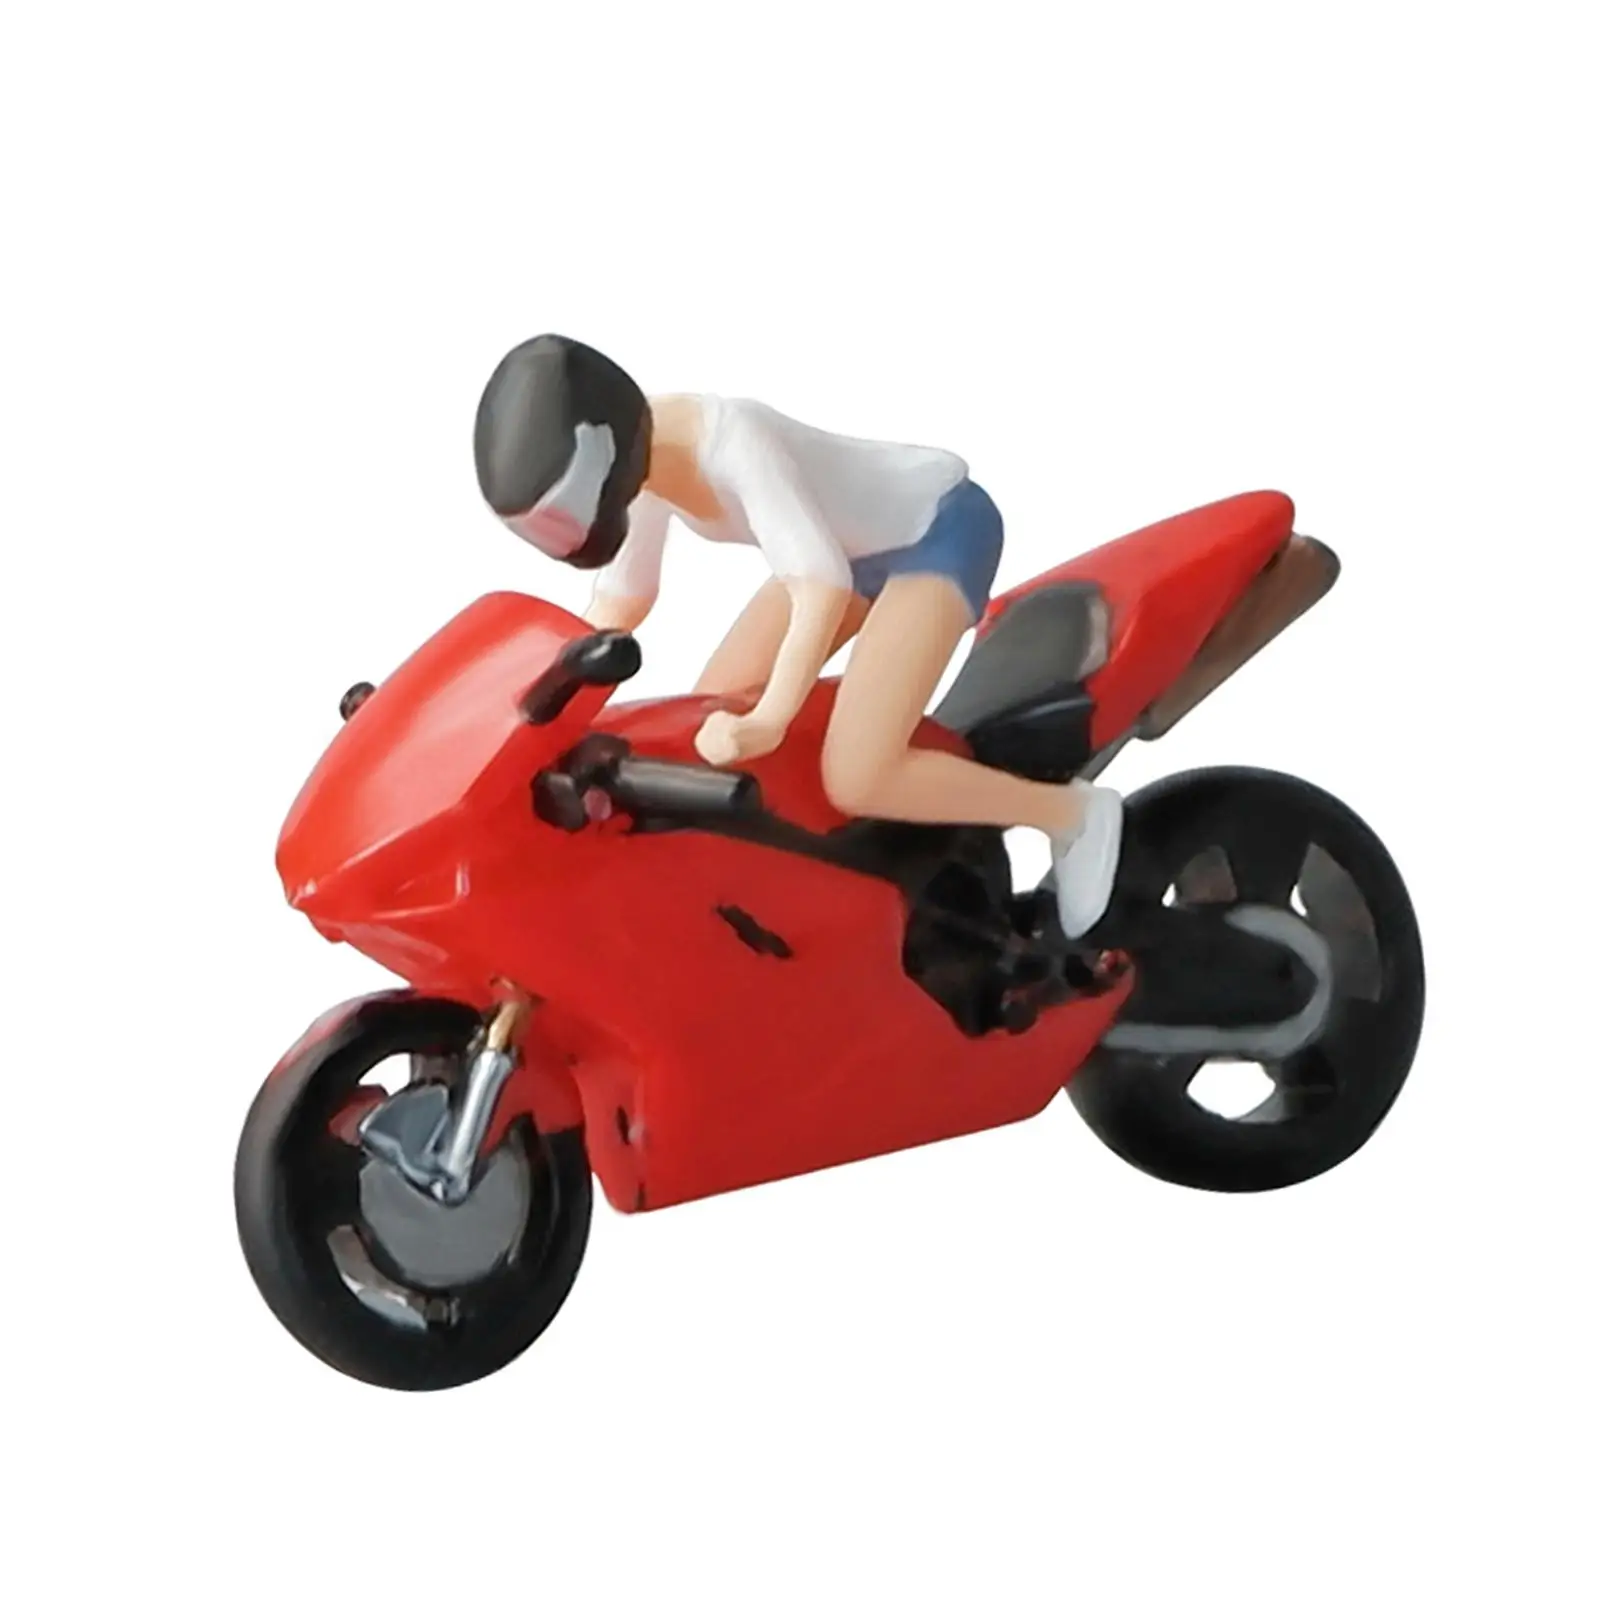 1/64 Motorcycle with Figure Movie Props Ornament 1/64 Motorcycle and Figures Model Micro Landscapes Decor DIY Projects Accessory